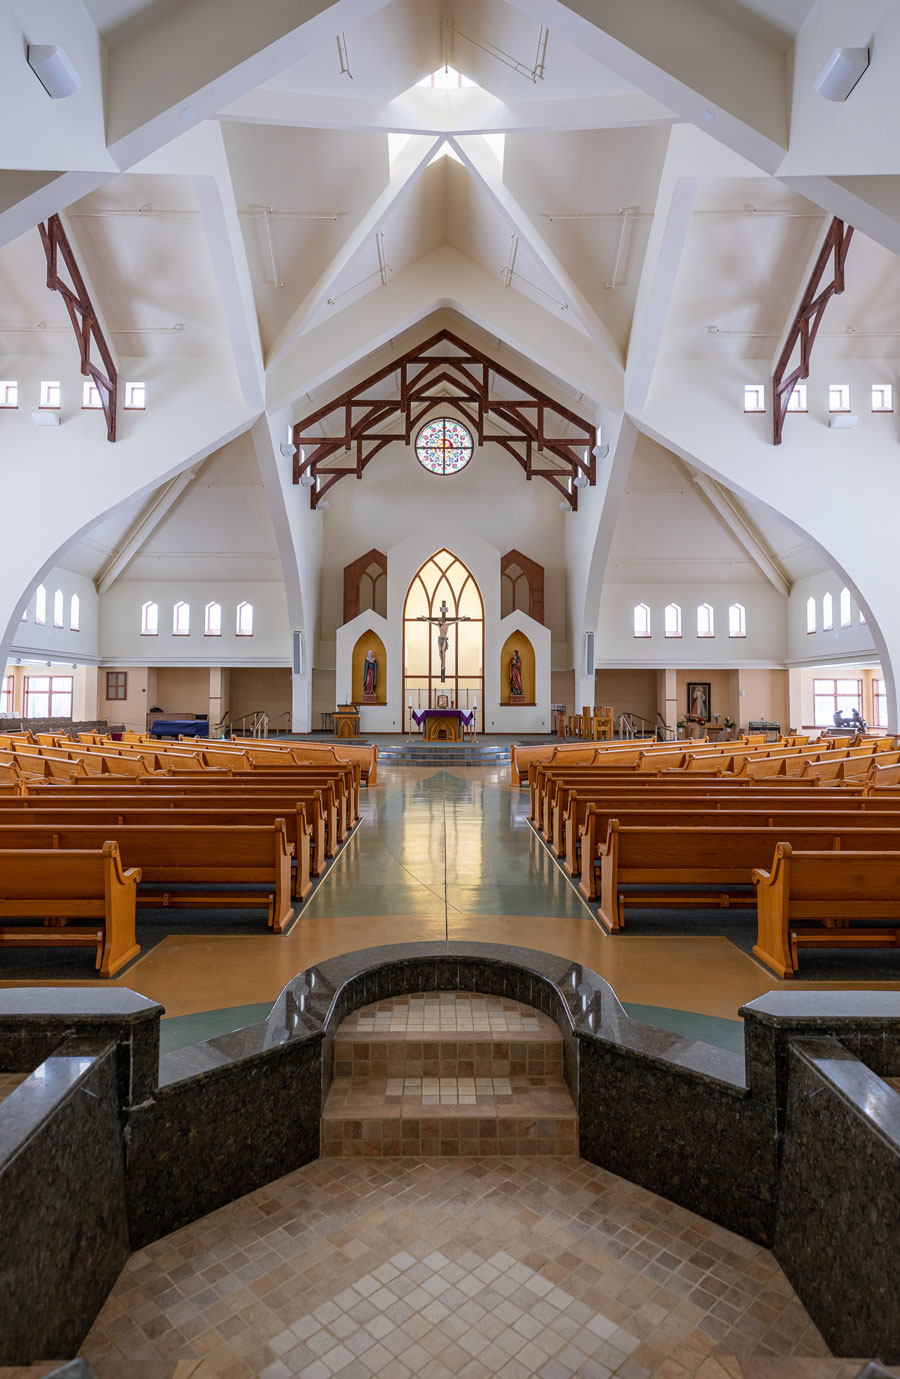 The interior of St. Andrew Catholic Church in Eagle River after restoration work was completed by Kuchar Construction following the 2018 earthquake